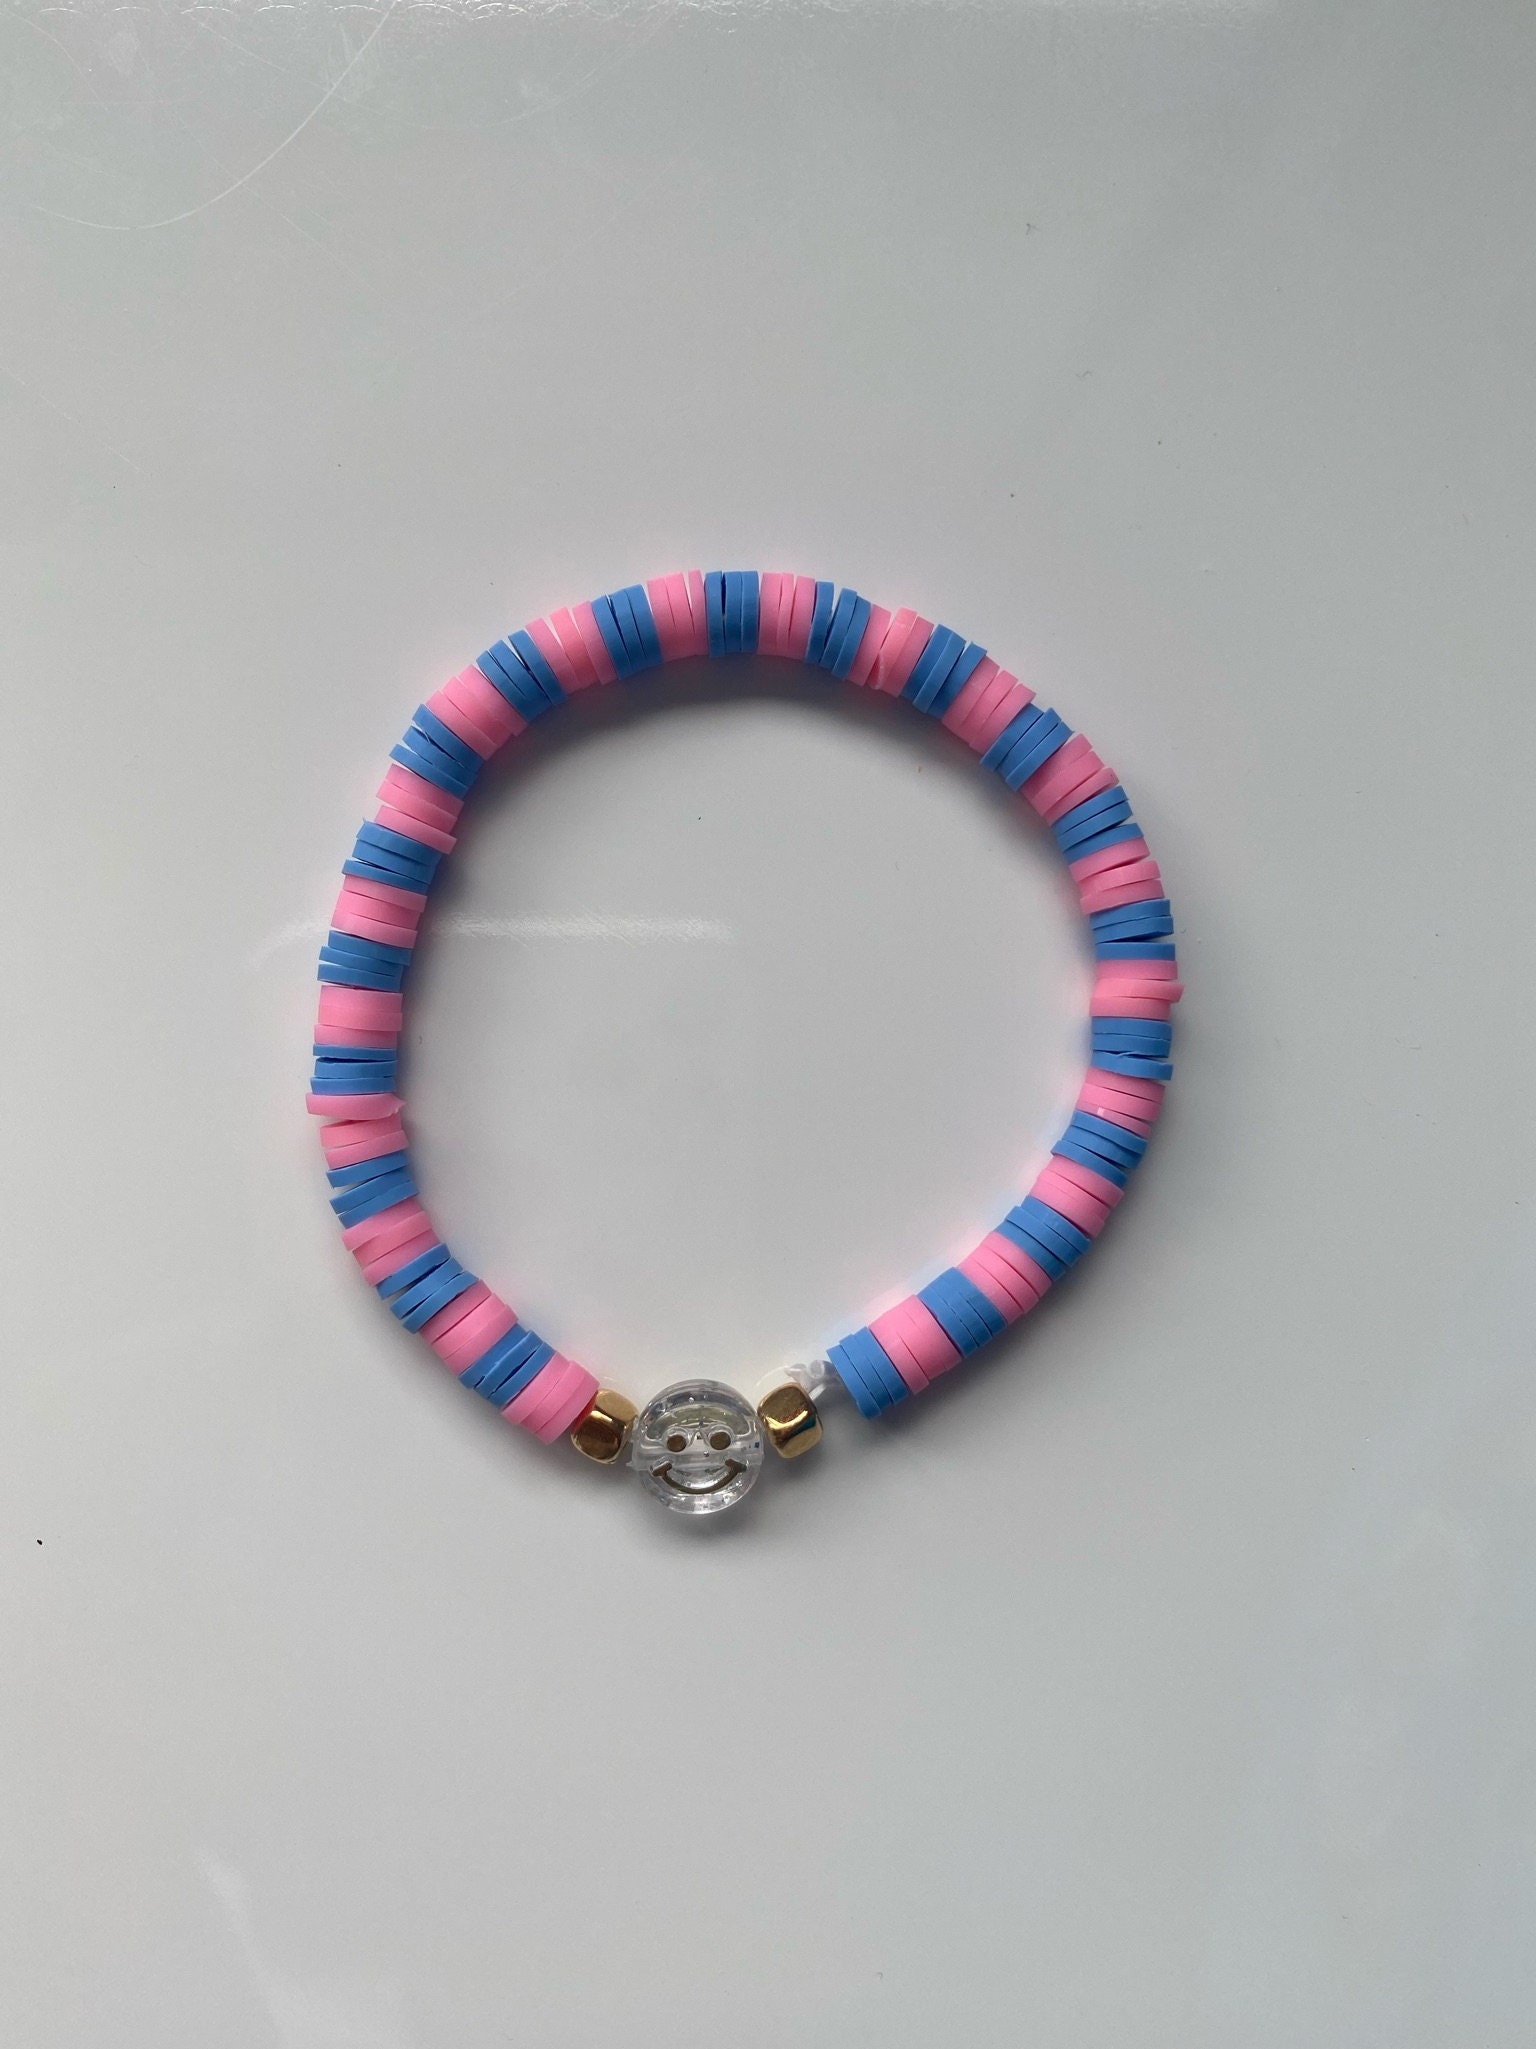 Cotton Candy Smiley Clay Bead Bracelet Jewels Jewelry | Etsy